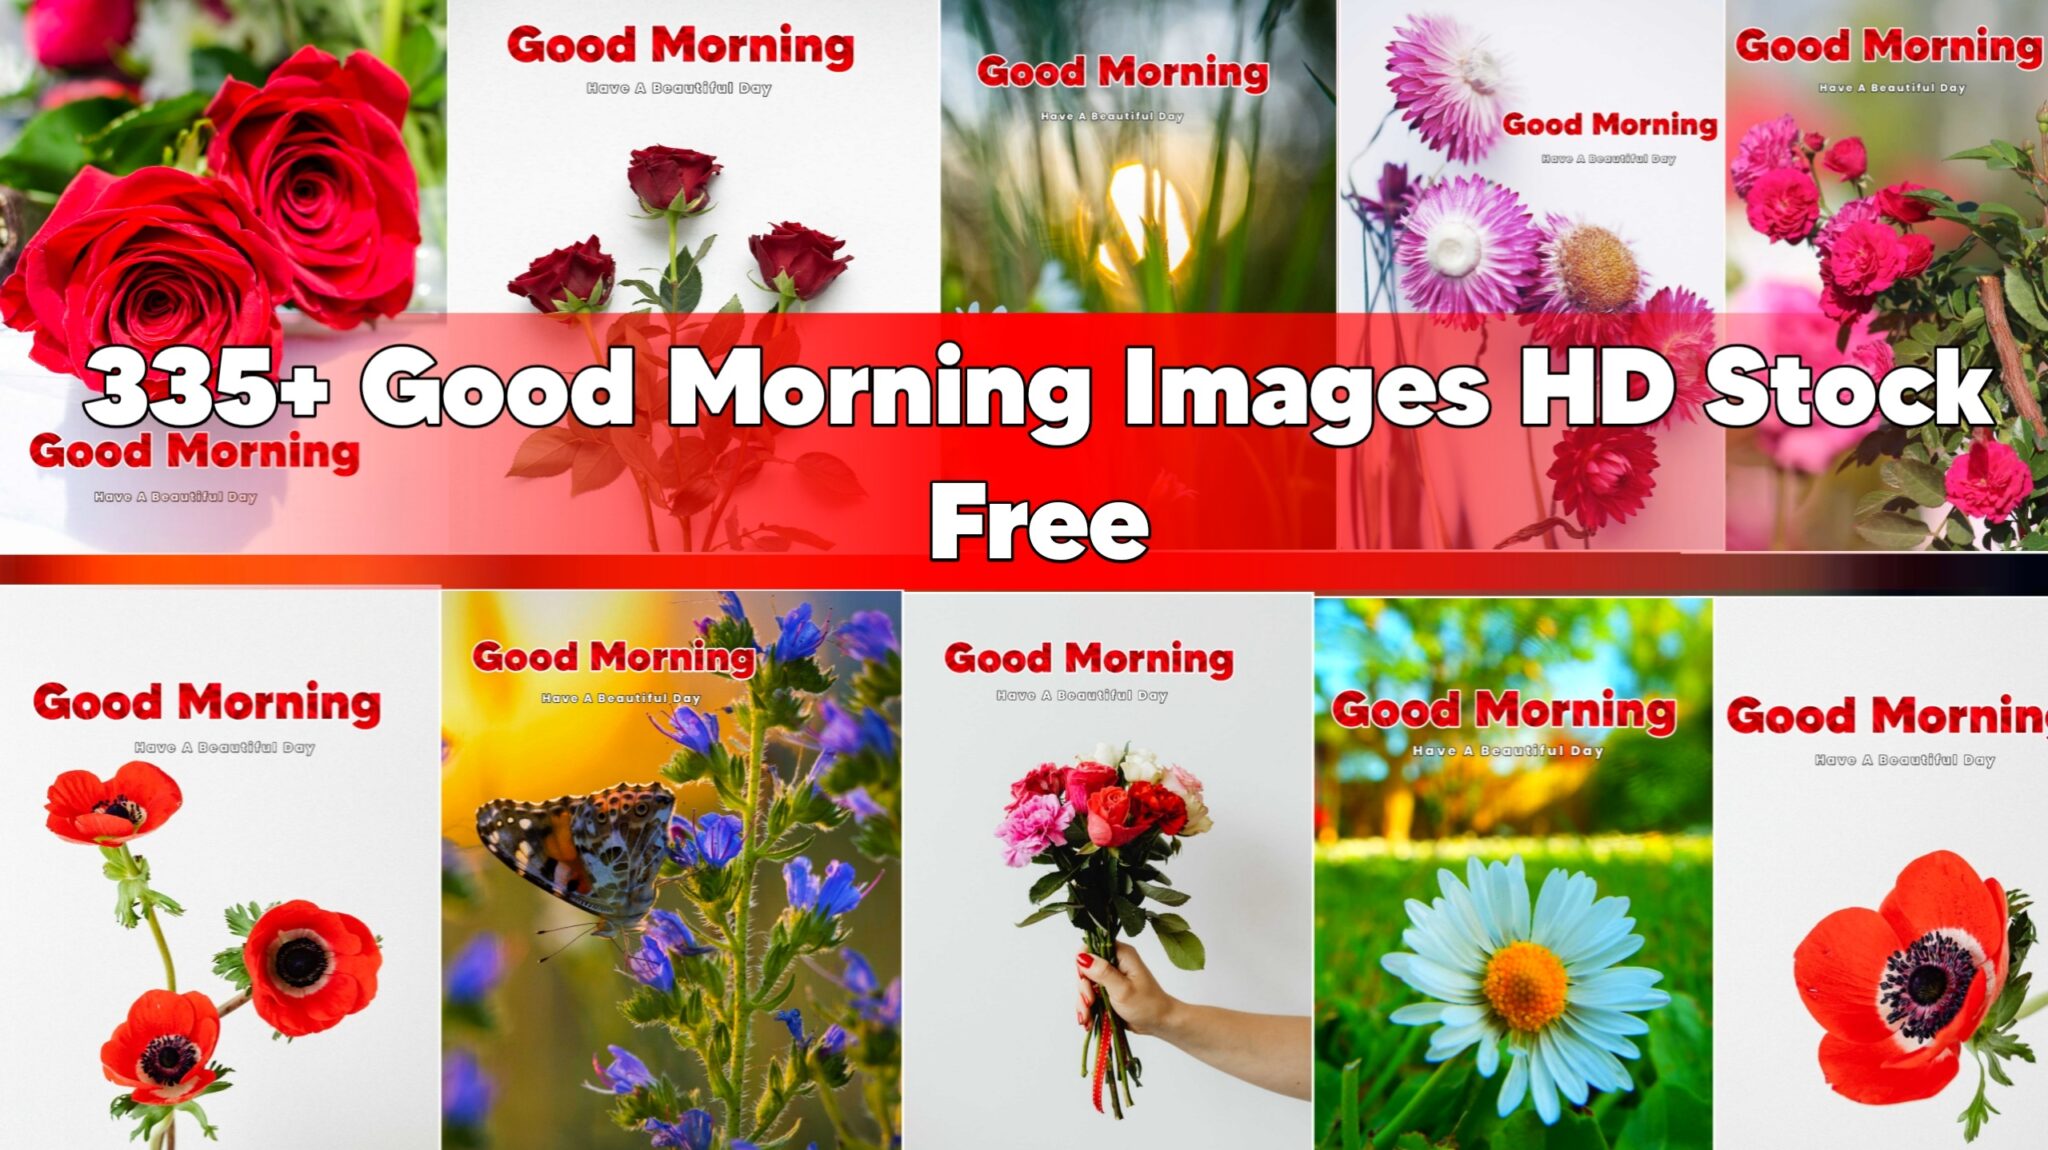 335+ Good Morning Images HD Free Stock